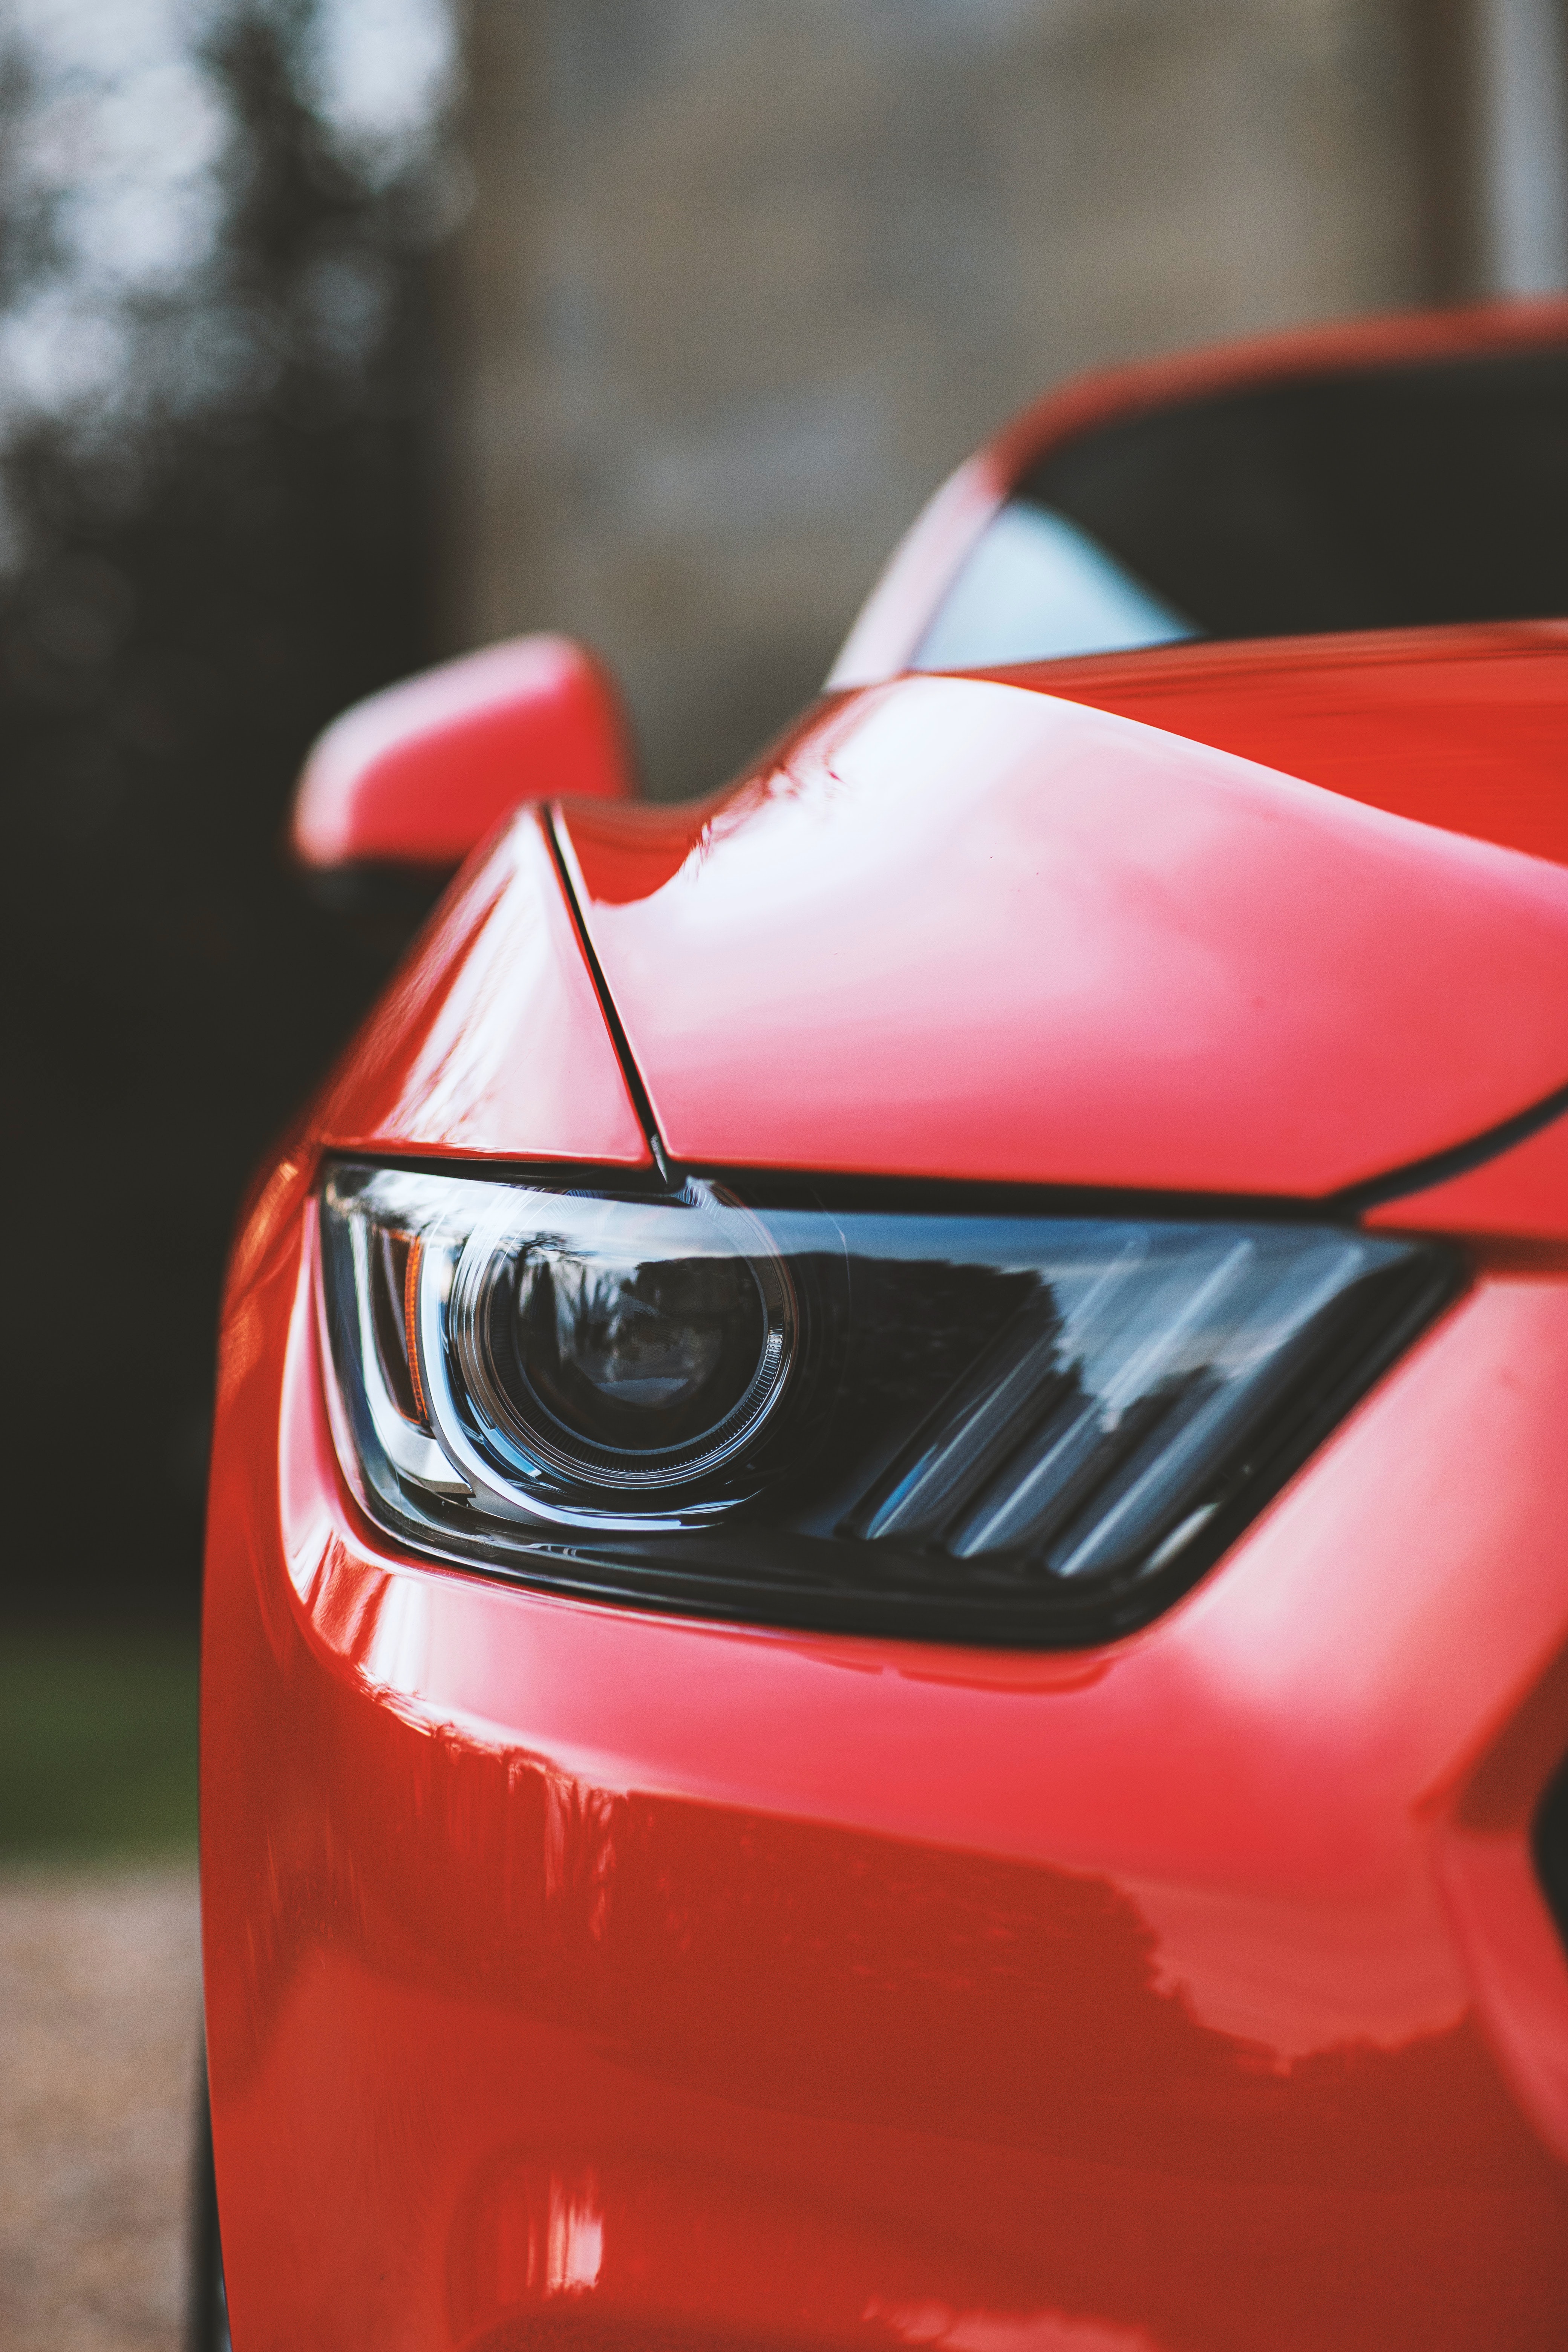 cars, red, car, front view, machine, headlight Image for desktop